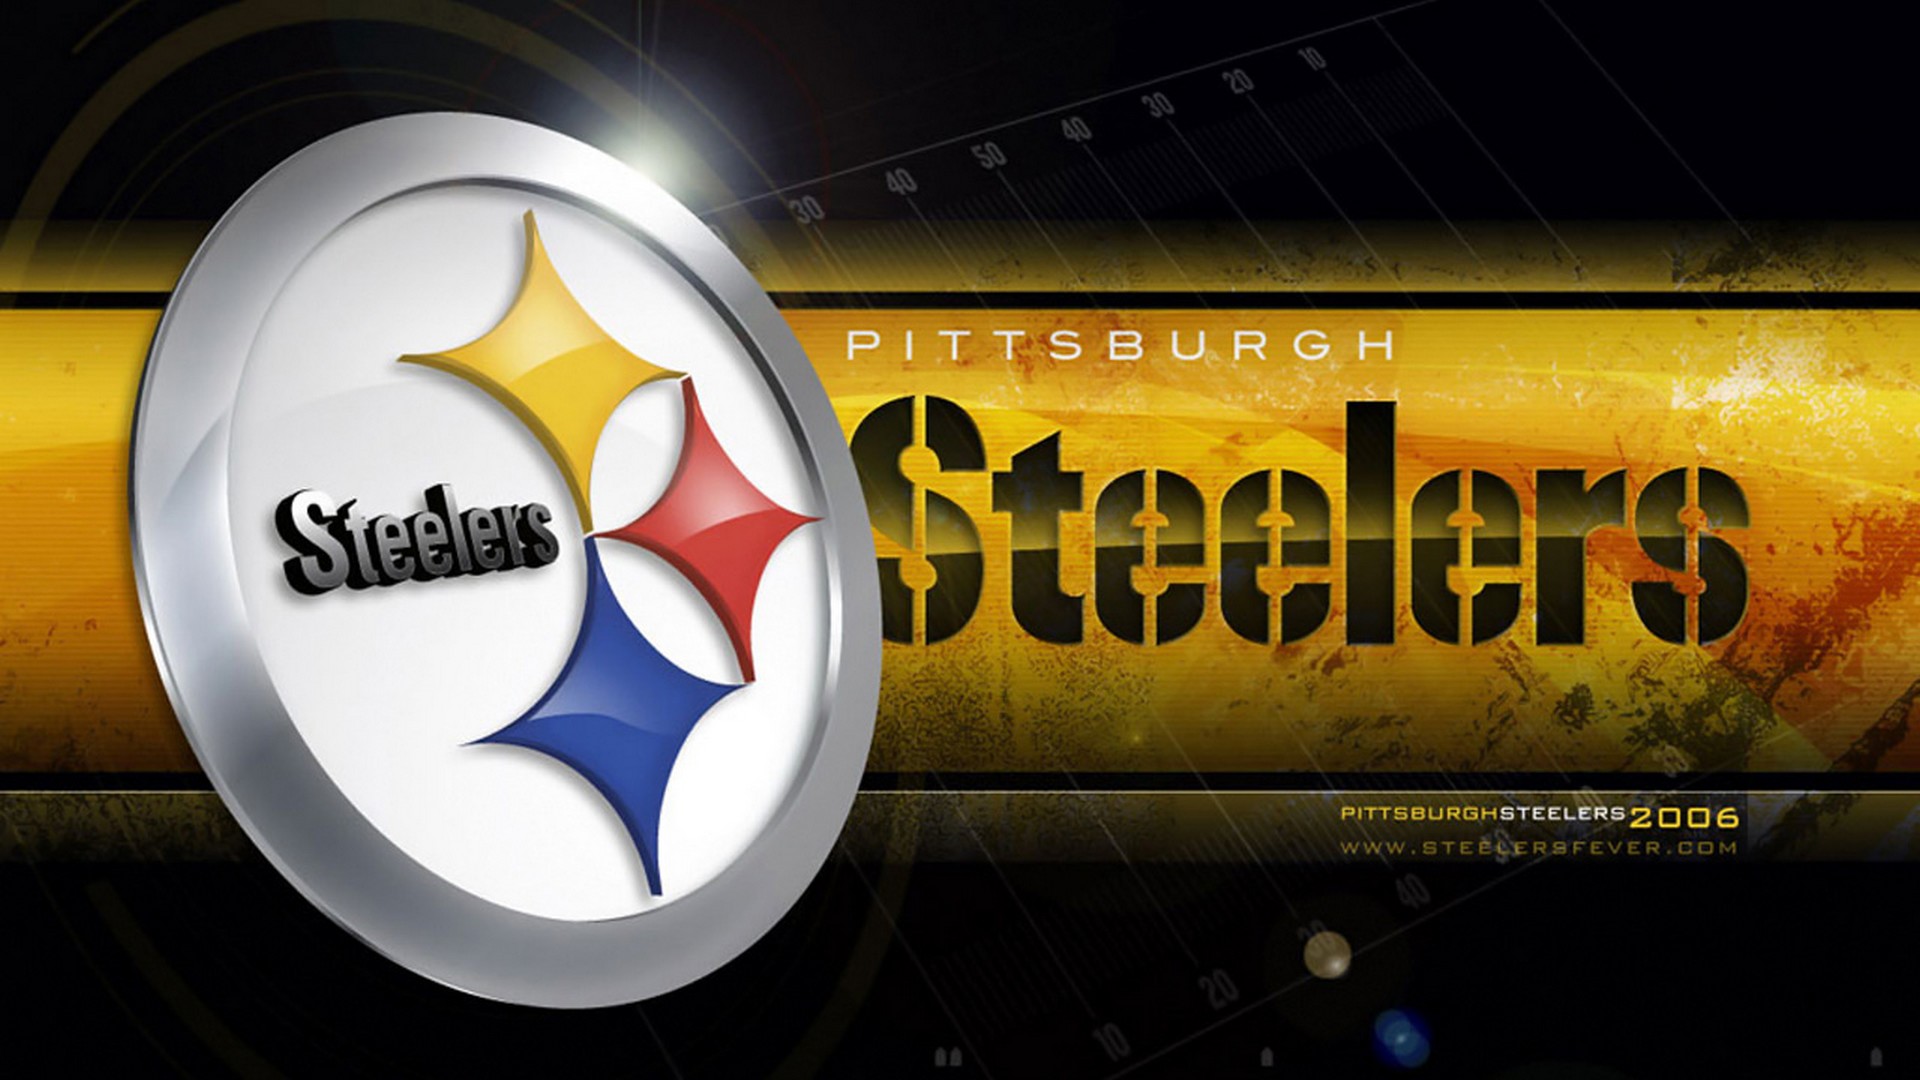 Download wallpapers Pittsburgh Steelers NFL 4k wooden texture american  football logo emblem Pittsburgh Pennsylvania USA National Football  League American Conference for desktop with resolution 3840x2400 High  Quality HD pictures wallpapers